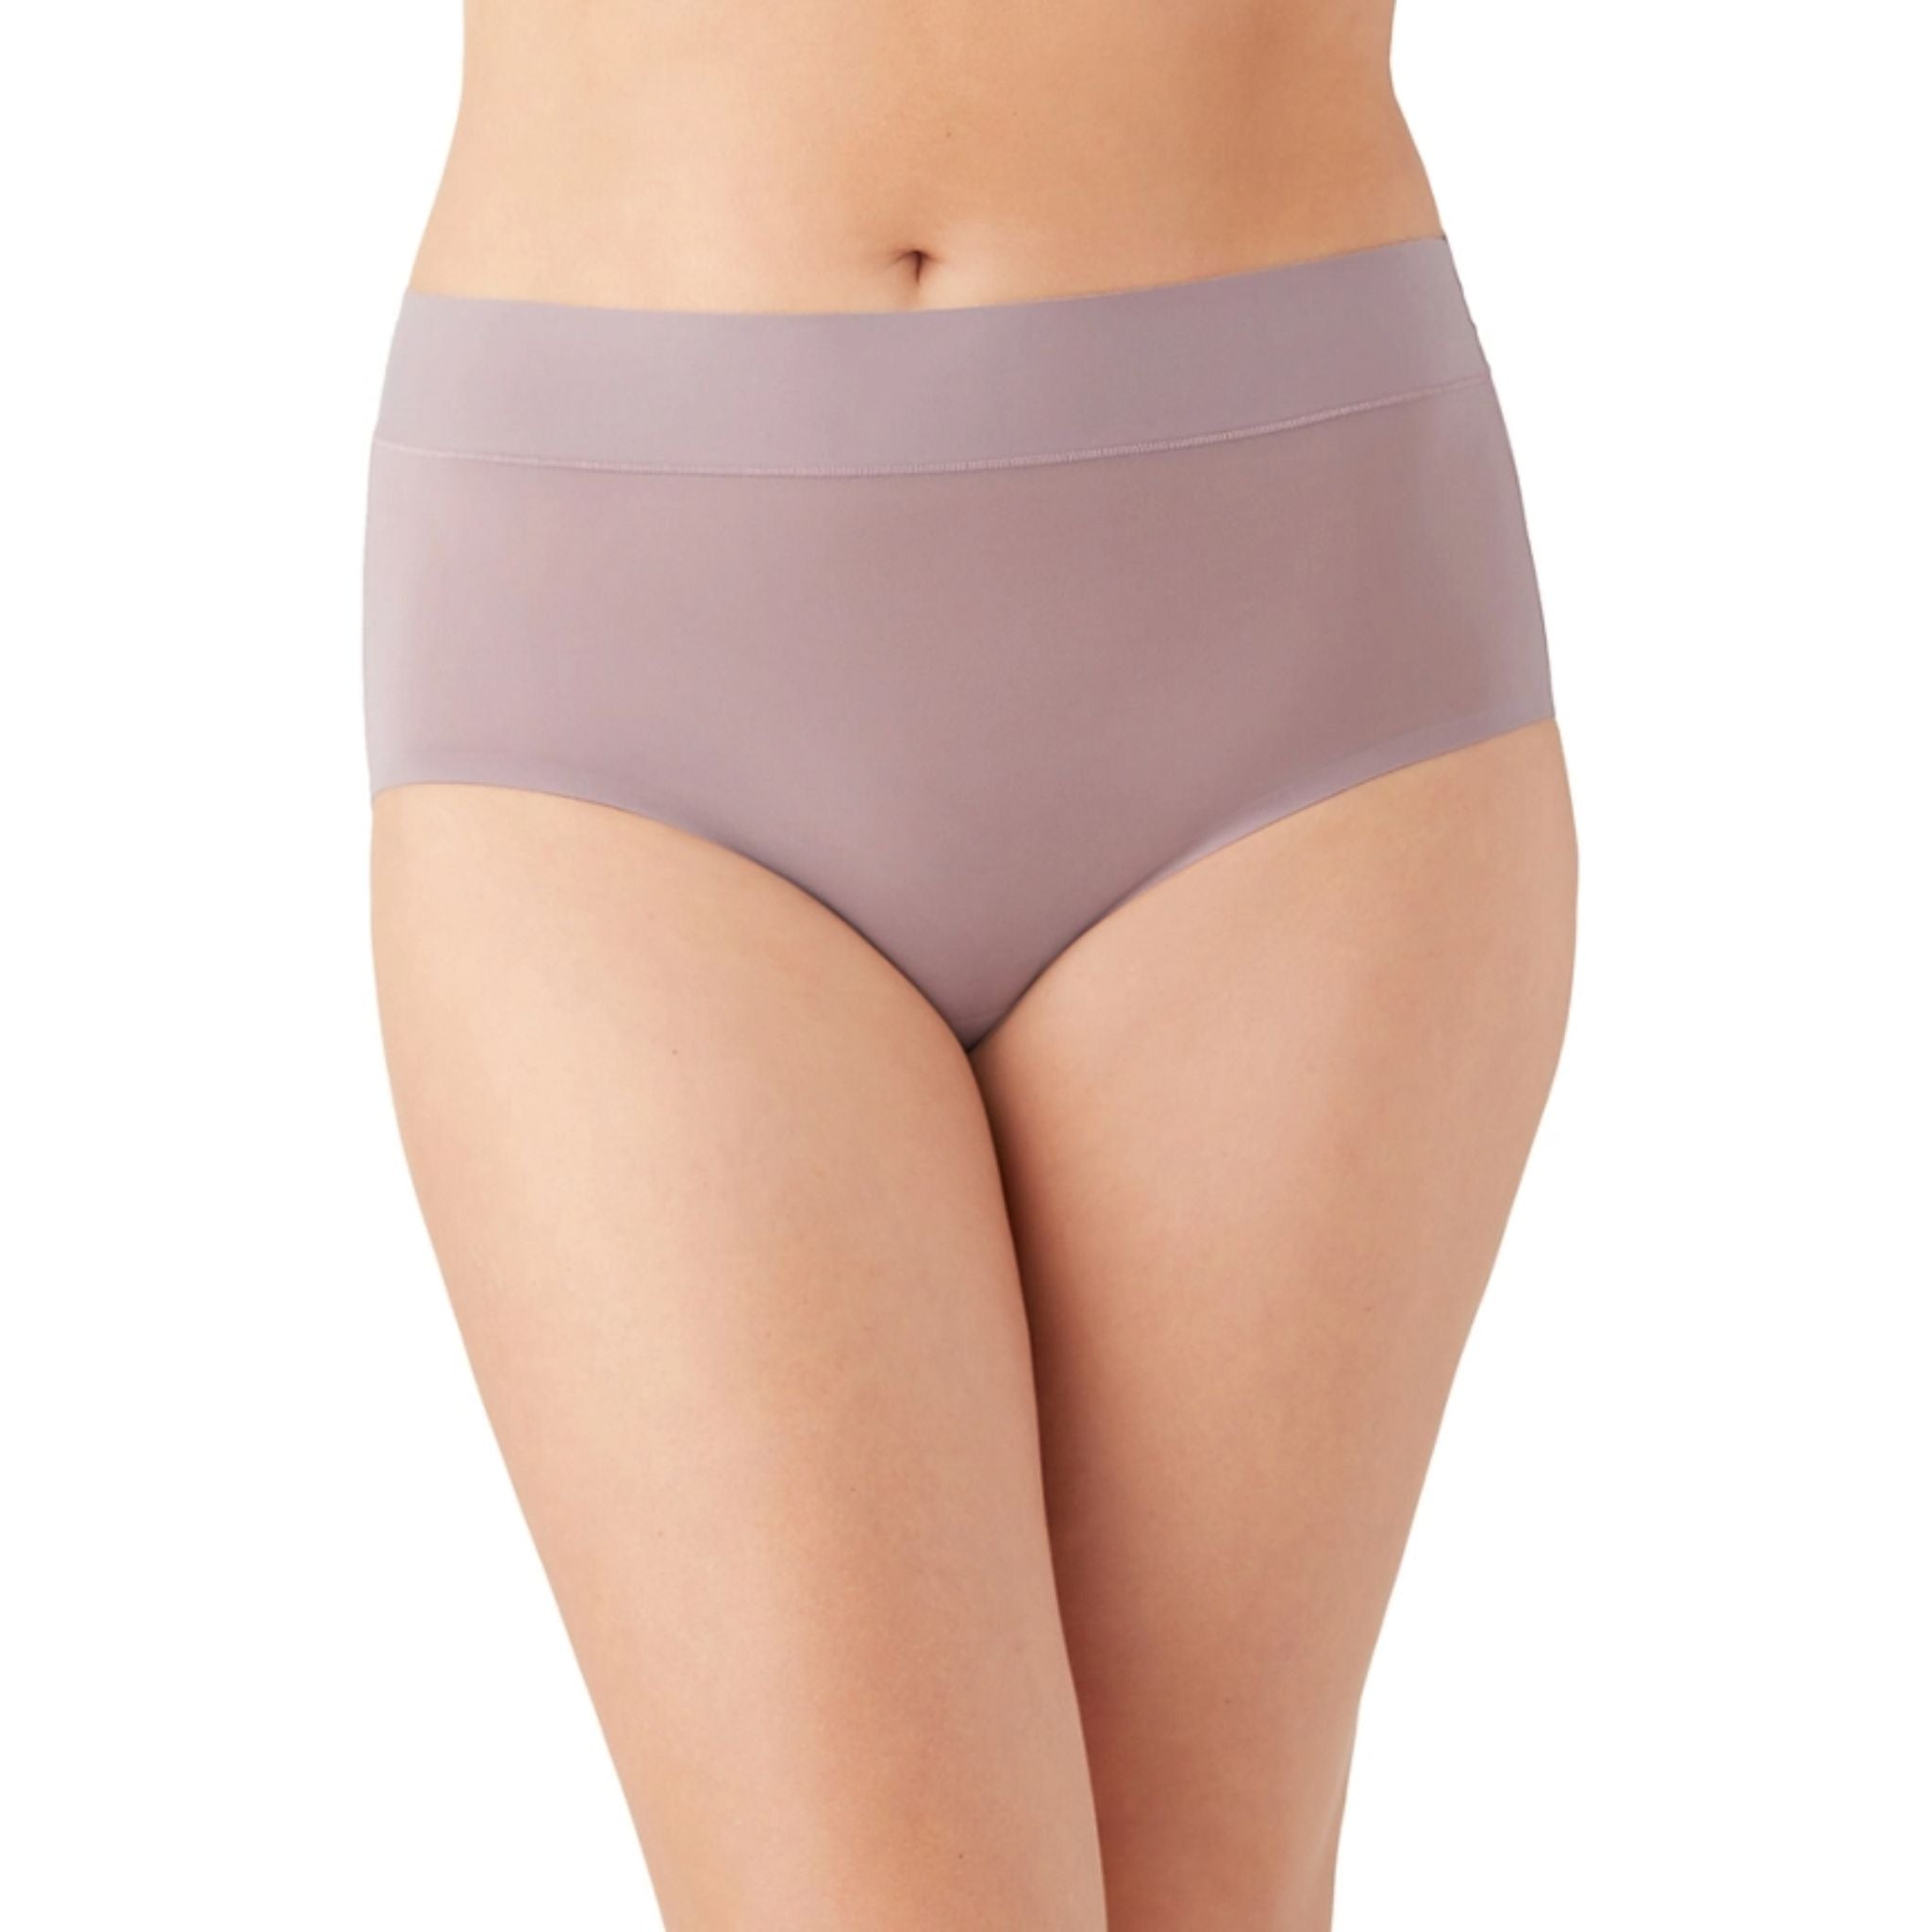 Uncomplicated and oh-so comfy, this easy-to-wear panty has an elastic-free waistband that won't pinch or dig and virtually vanishes under your clothes, making it the perfect start to any outfit.  Full coverage brief  Wide, elastic-free waistband won't pinch or dig and provides a smooth look under clothes  Bonded leg openings eliminate panty lines  Cotton gusset  Fabric content: Body: 79% Nylon/21% Spandex, Crotch Lining: 100% Cotton